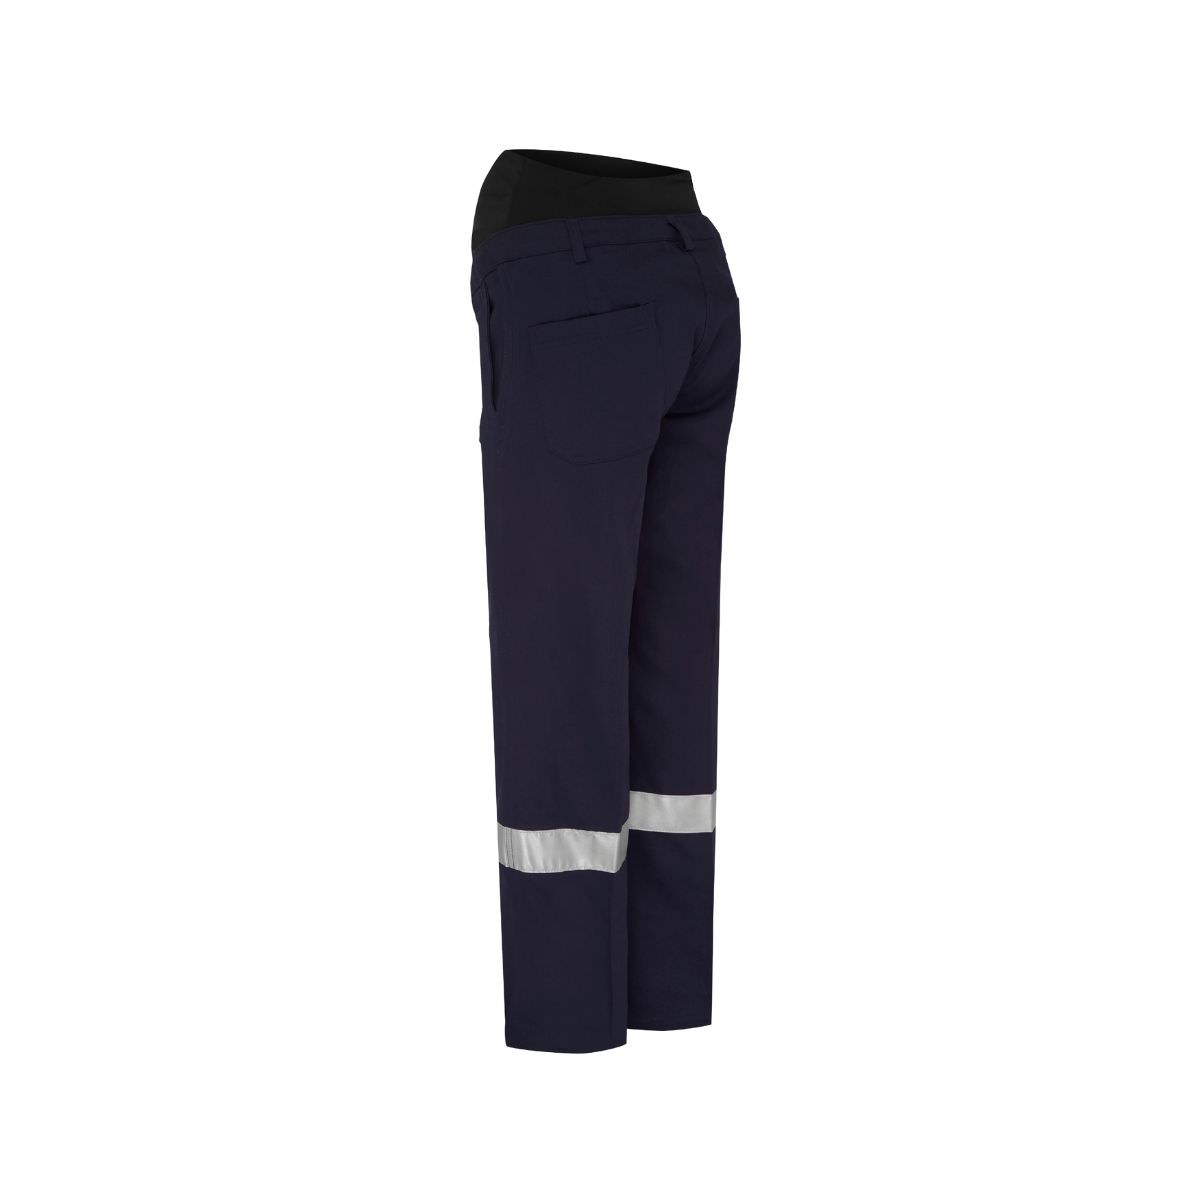 Bisley Women's Taped Maternity Drill Work Pants BPLM6009T